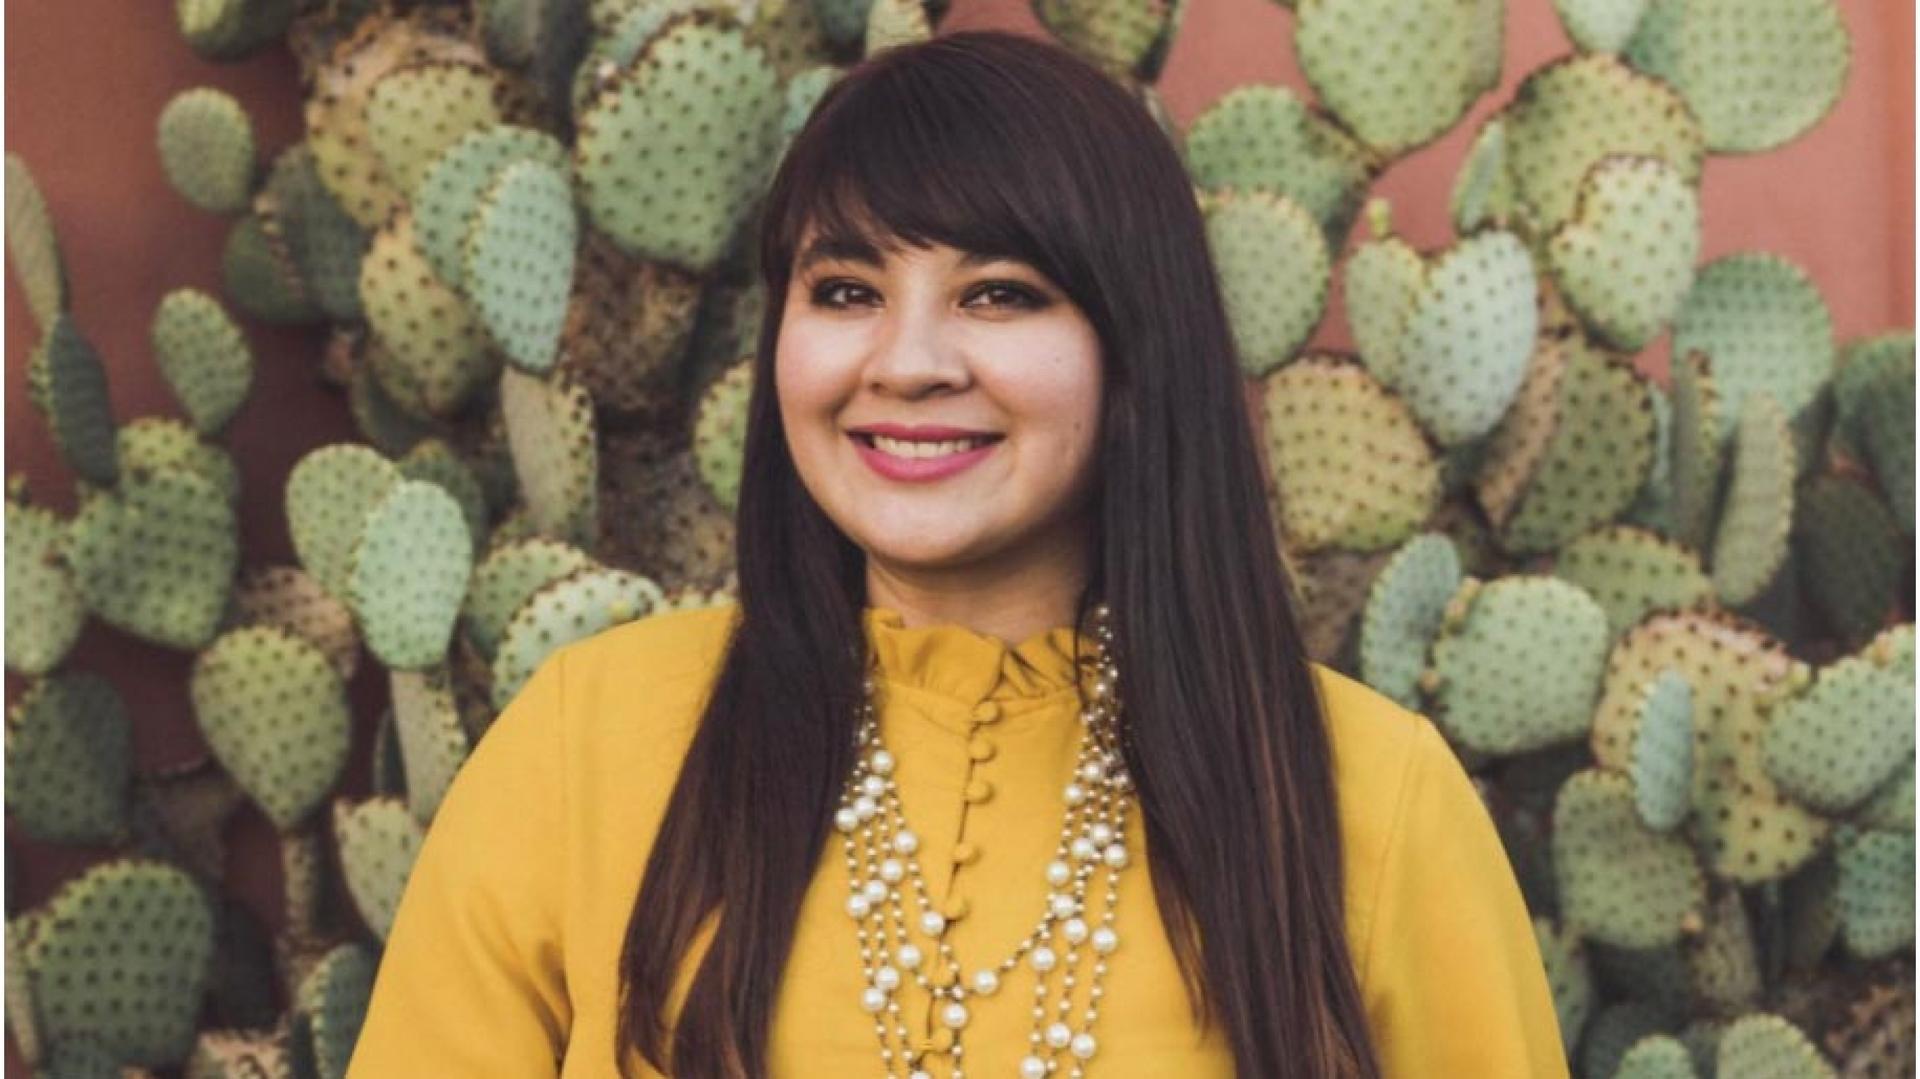 Reyna Montoya is an Arizona resident and the founder of Aliento, an immigrant aid organization.